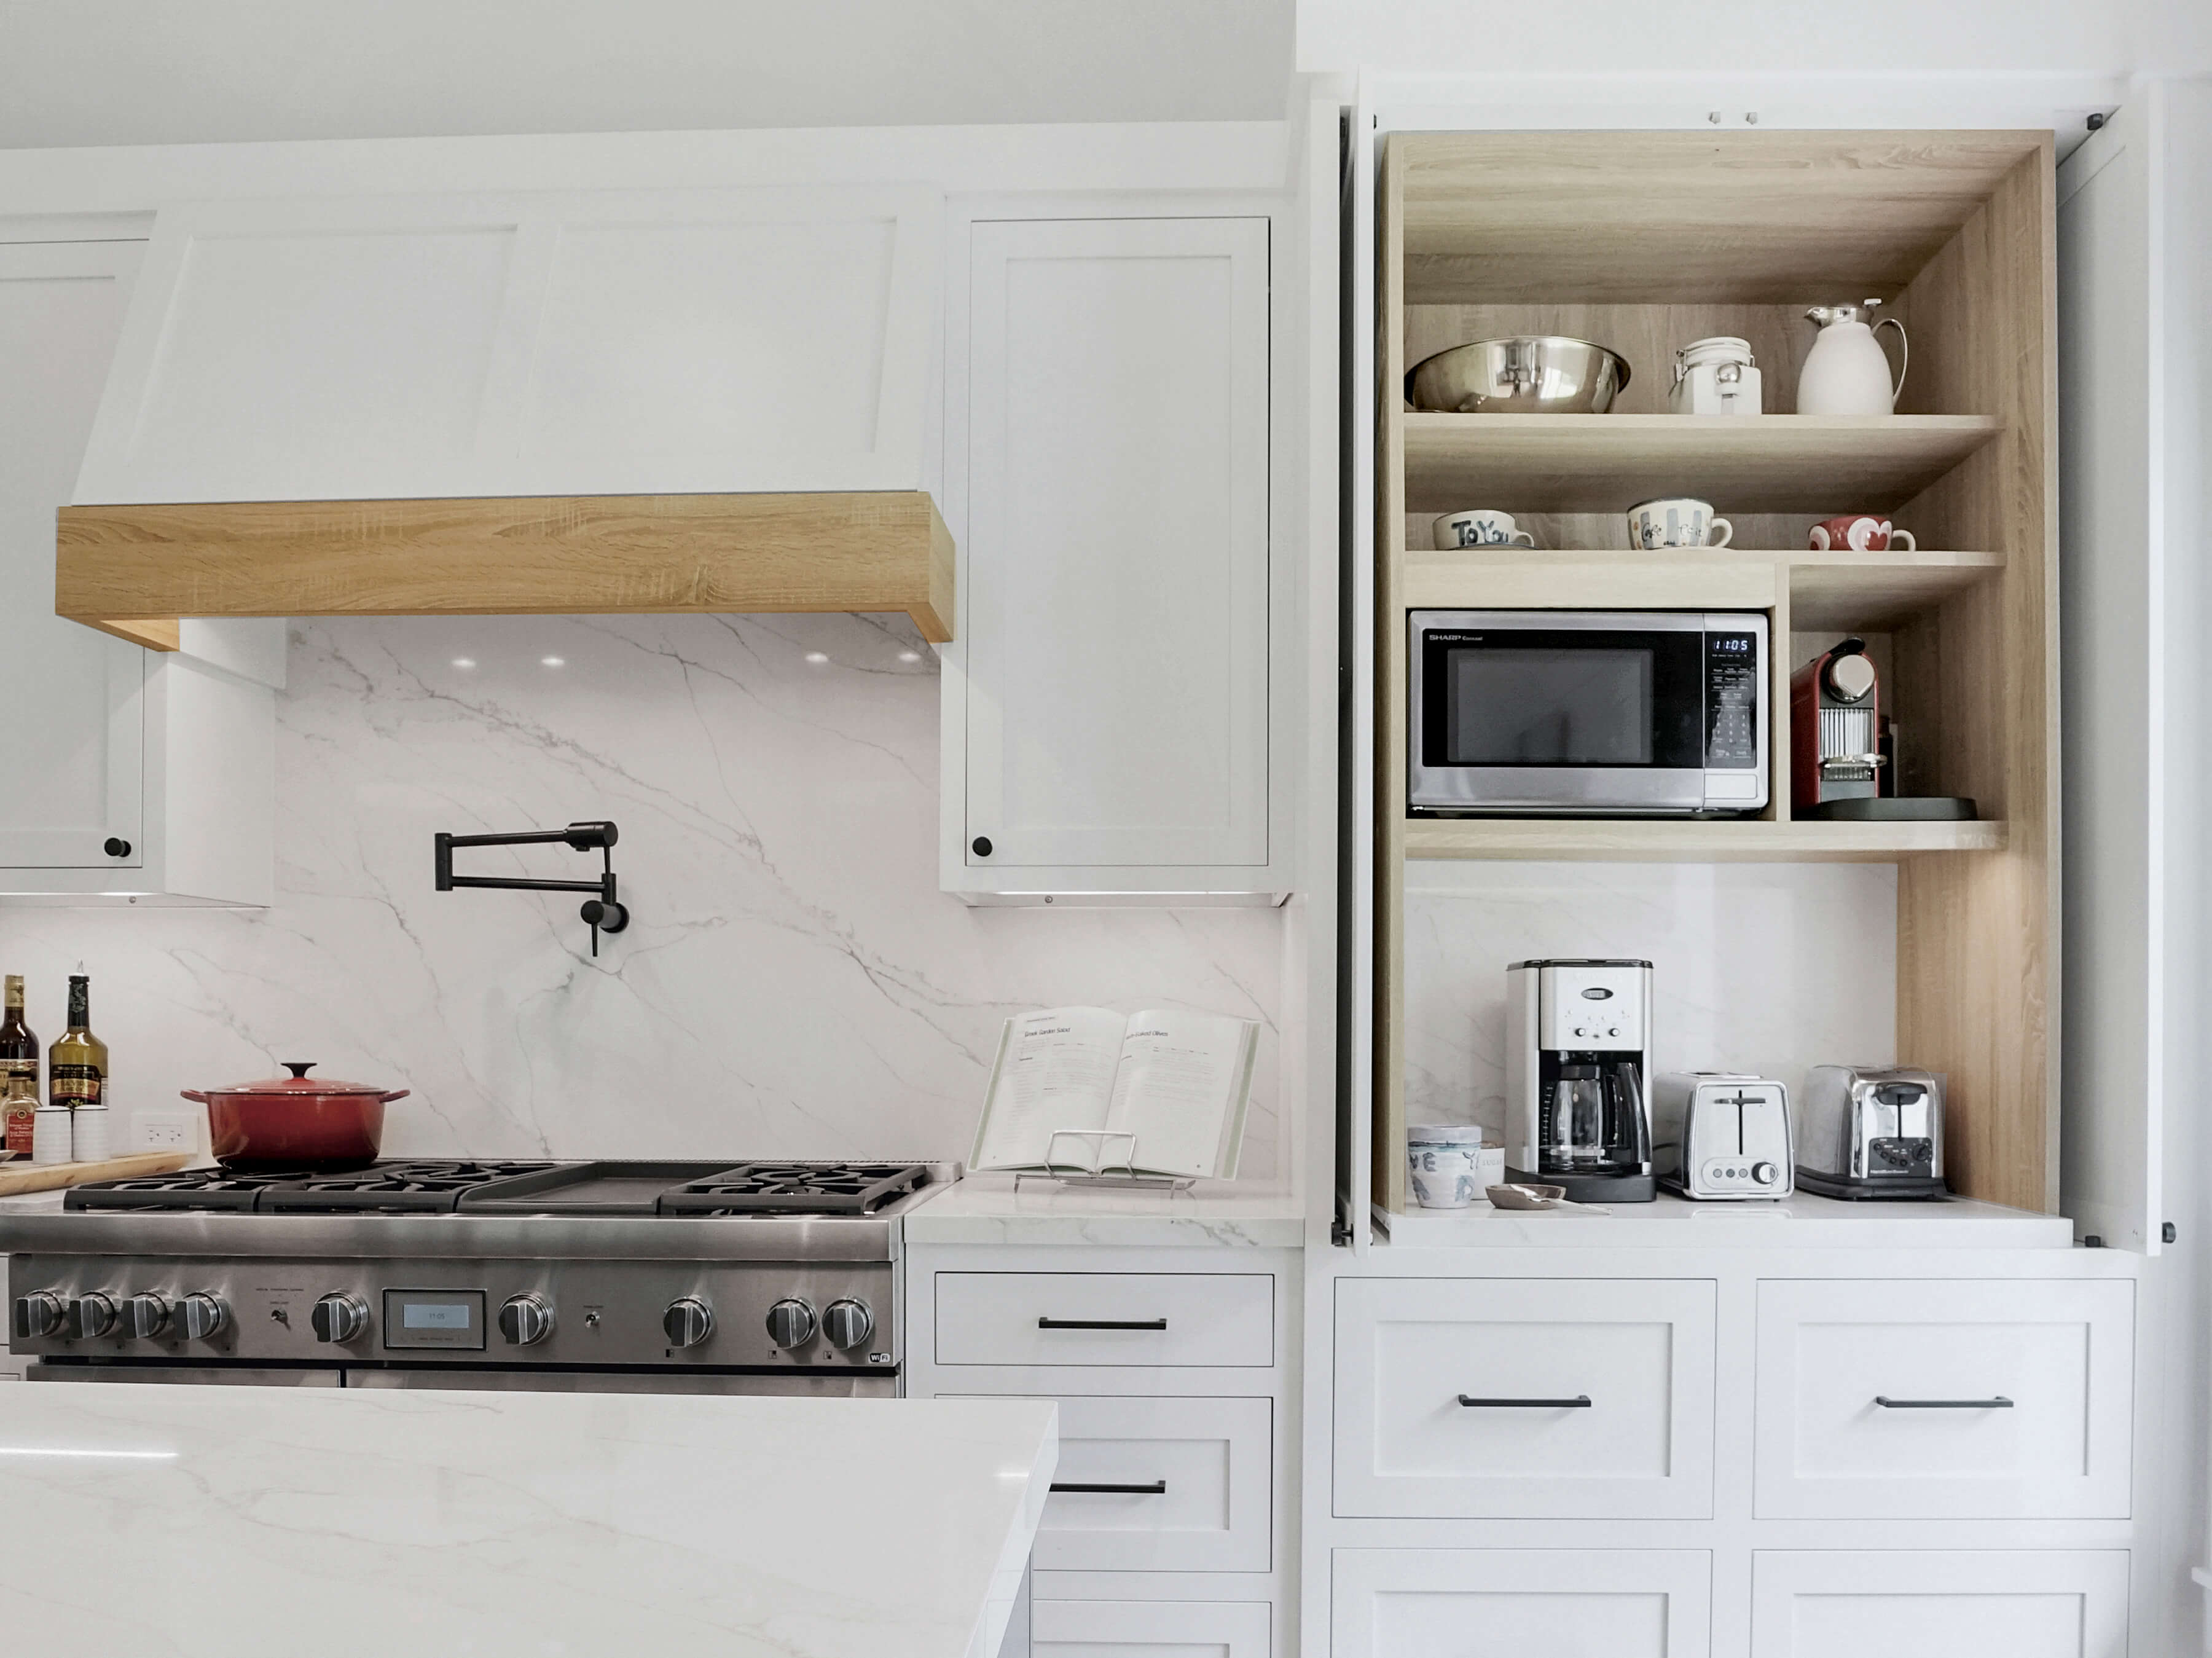 11 Kitchen Cabinet Storage Ideas You'll Fall In Love With